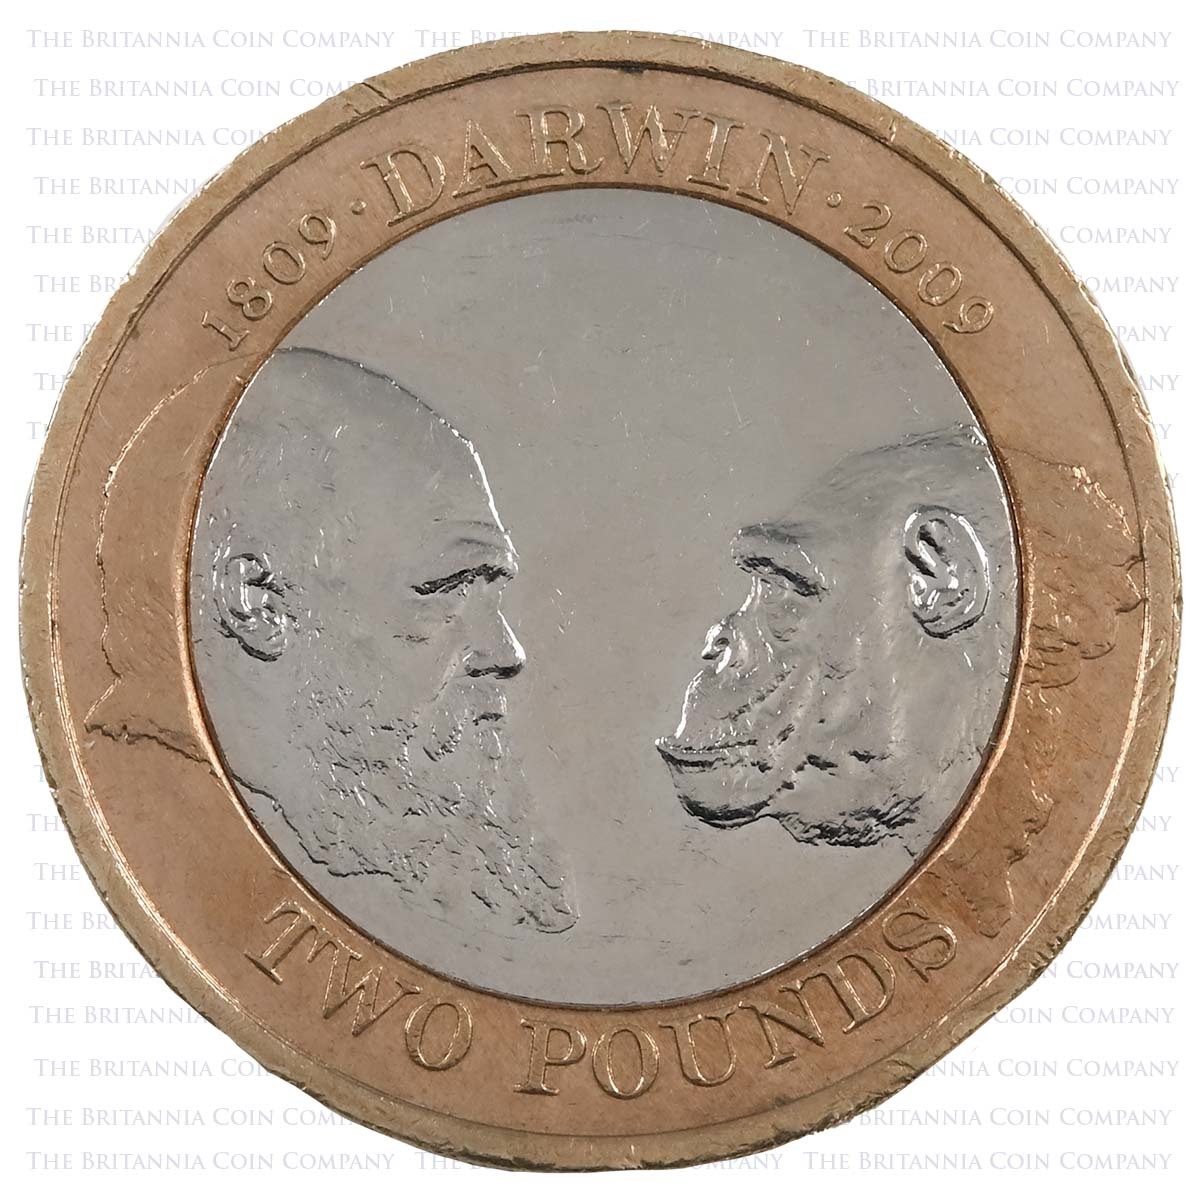 2009 Charles Darwin Circulated Two Pound Coin Reverse